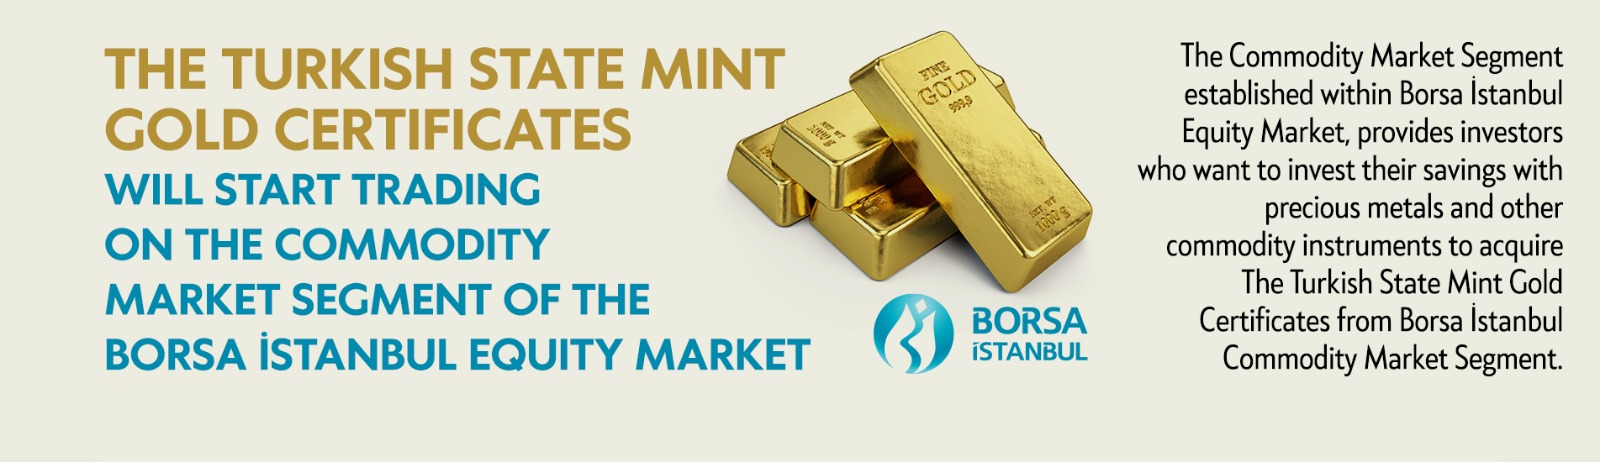 The Turkish State Mint Gold Certificates will start trading on the commodity market degment of the Borsa İstanbul equity market